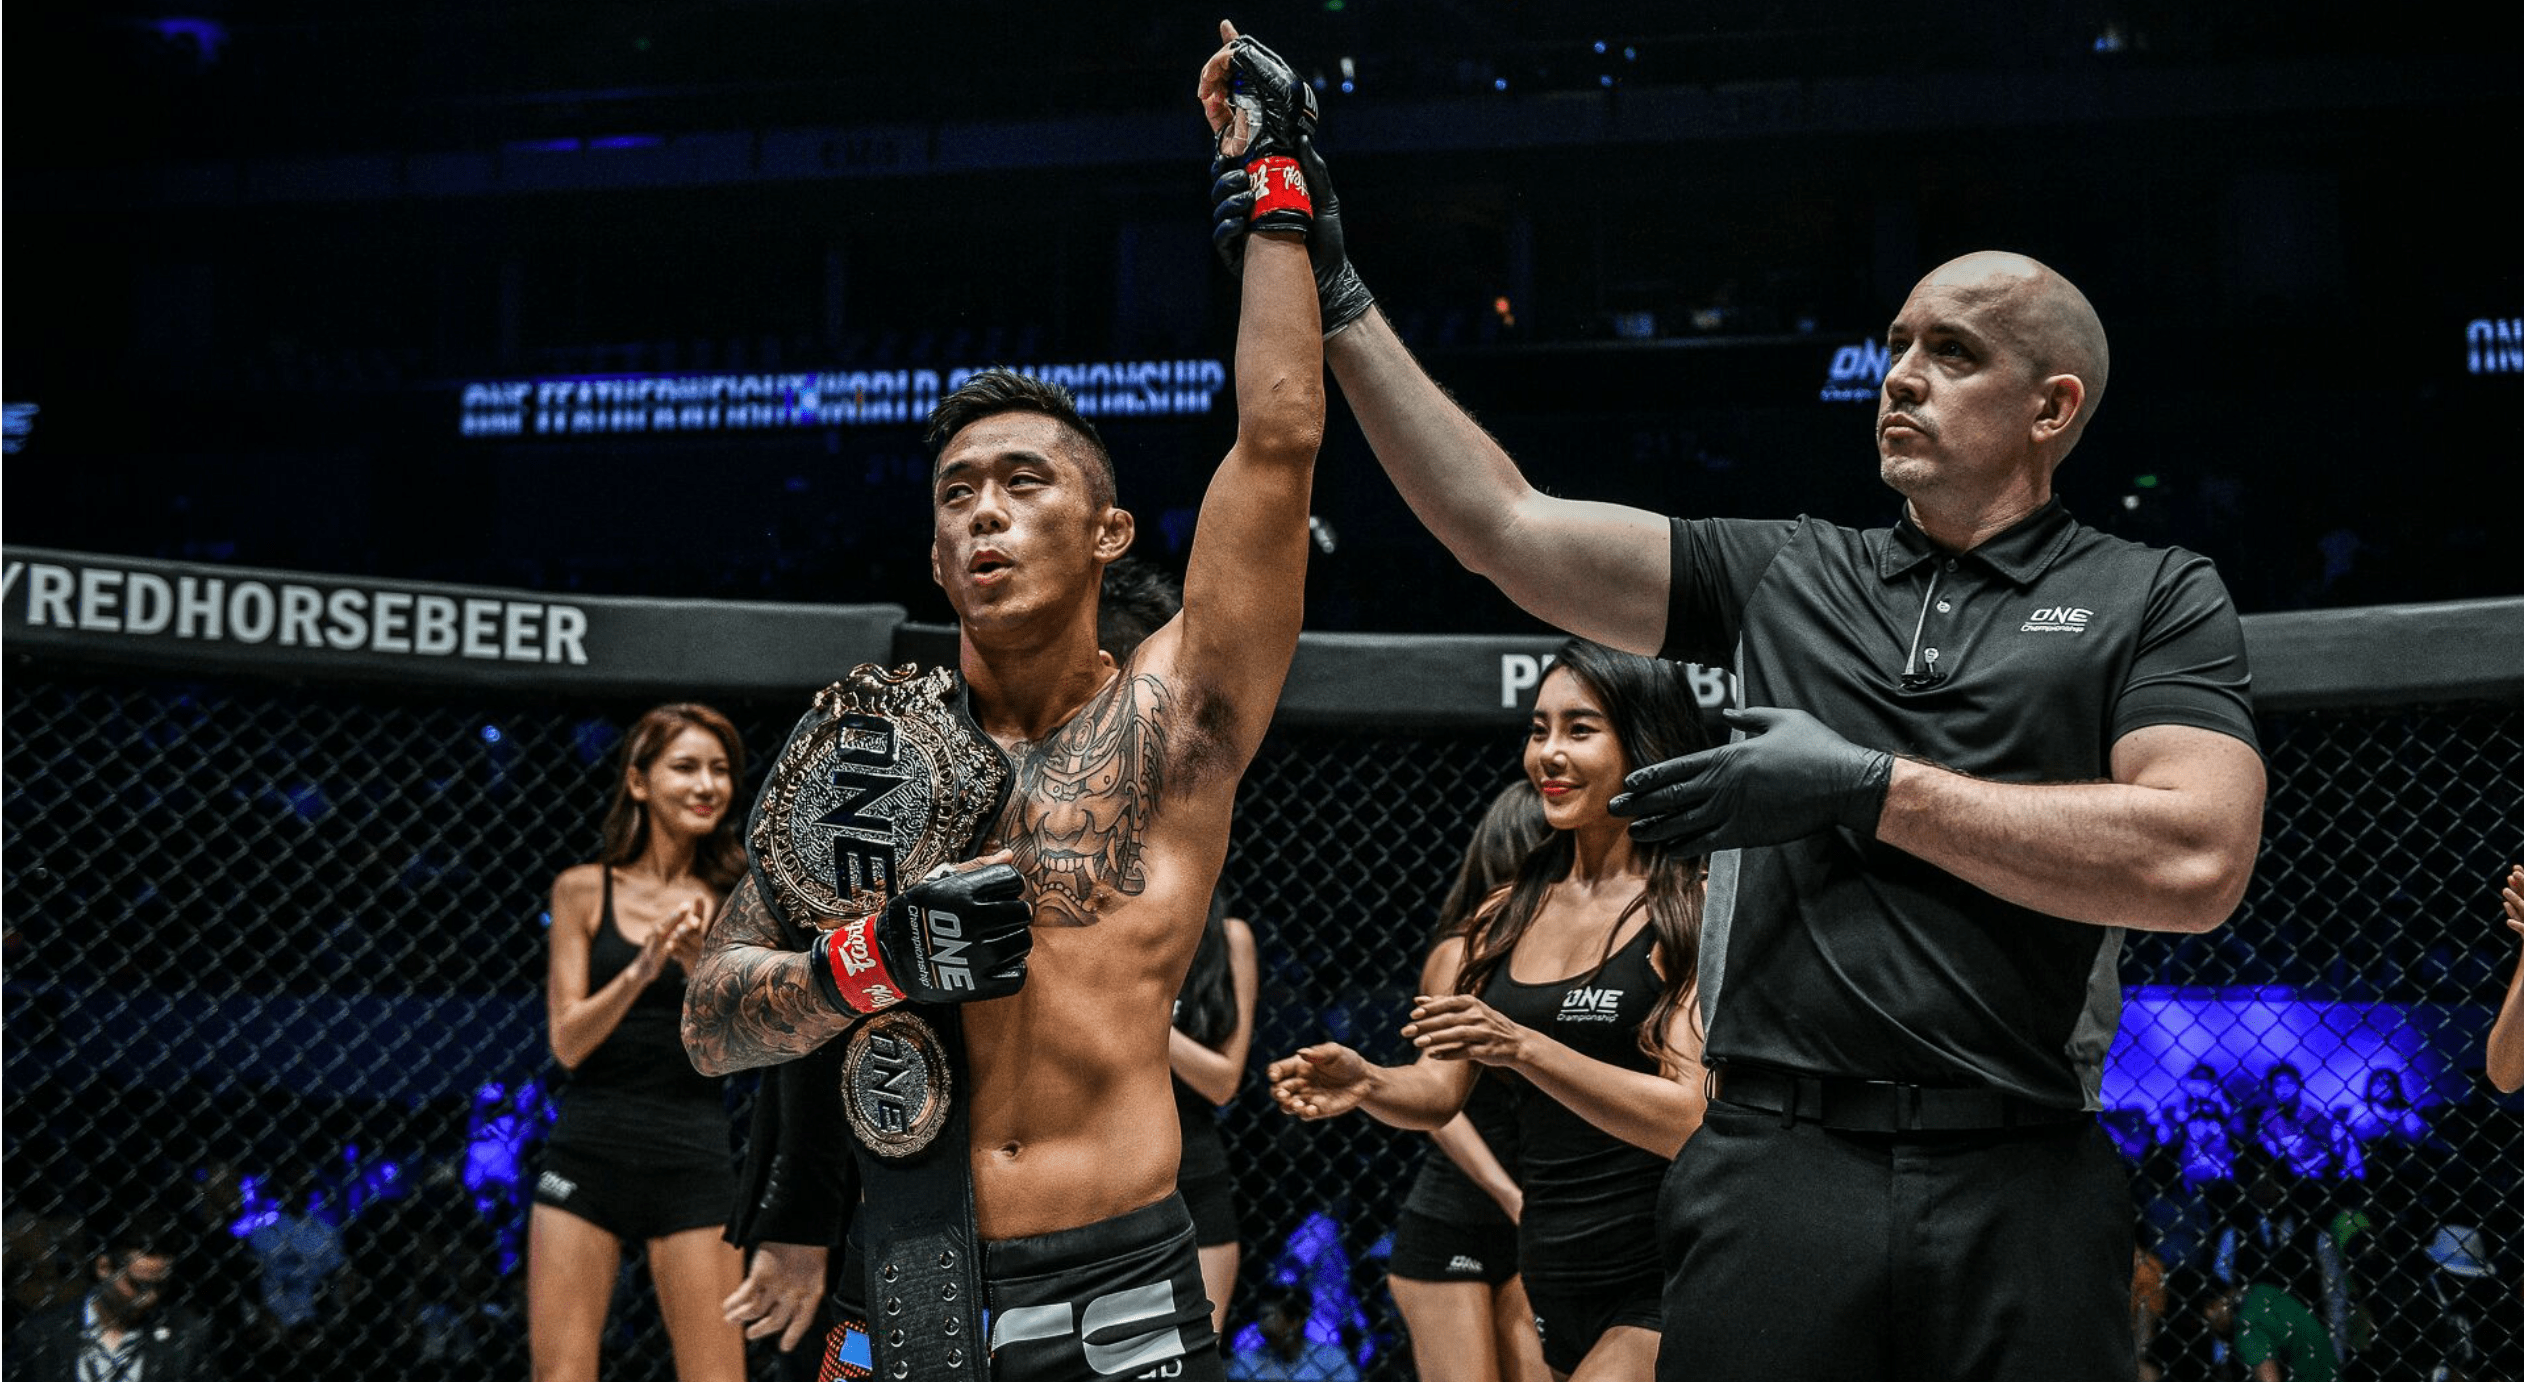 Third Time’s A Charm, As Martin Nguyen Prepares For Upcoming Title Defence